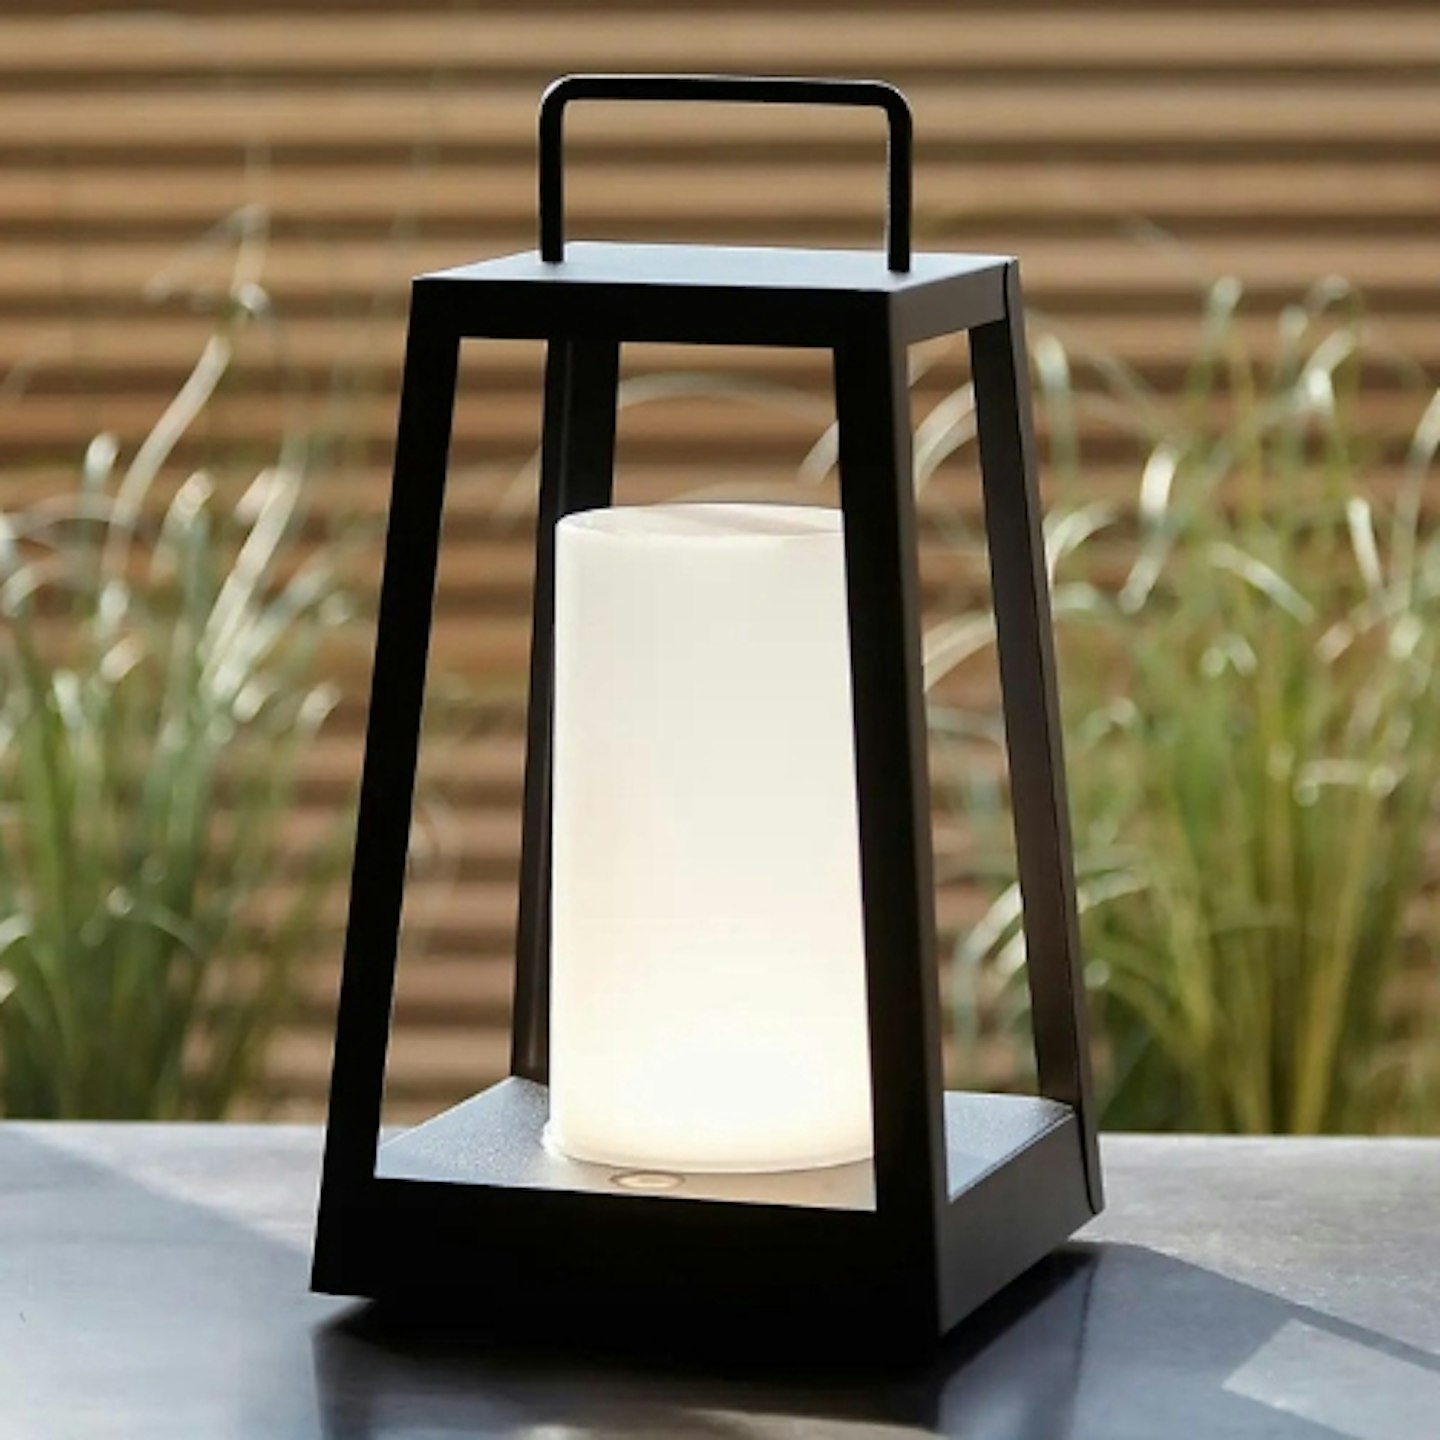 Vogue Talla Outdoor USB Rechargeable Table Light